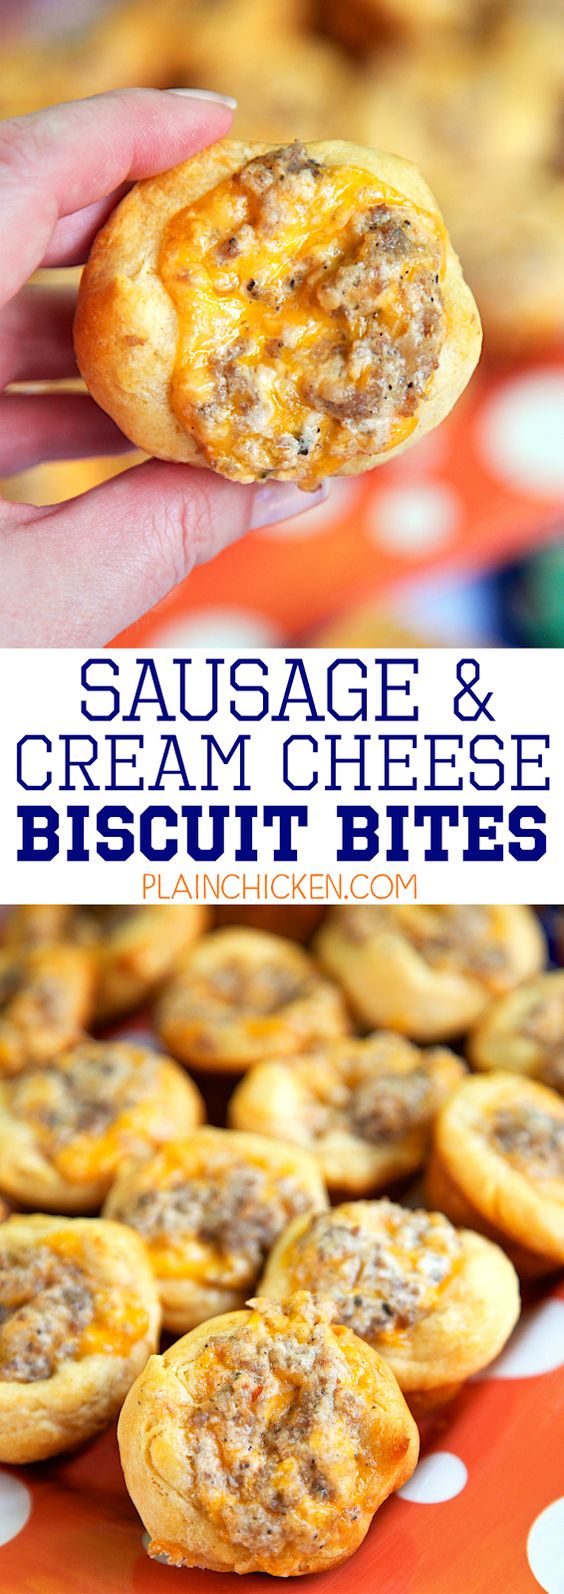 Sausage and Cream Cheese Biscuit Bites - so GOOD! I'm totally addicted to these things! Sausage, cream cheese, Worcestershire, cheddar cheese baked in biscuits. Can make the sausage mixture ahead of time and refrigerate until ready to bake. Great for tailgating, breakfast and parties! Everyone loves this recipe!